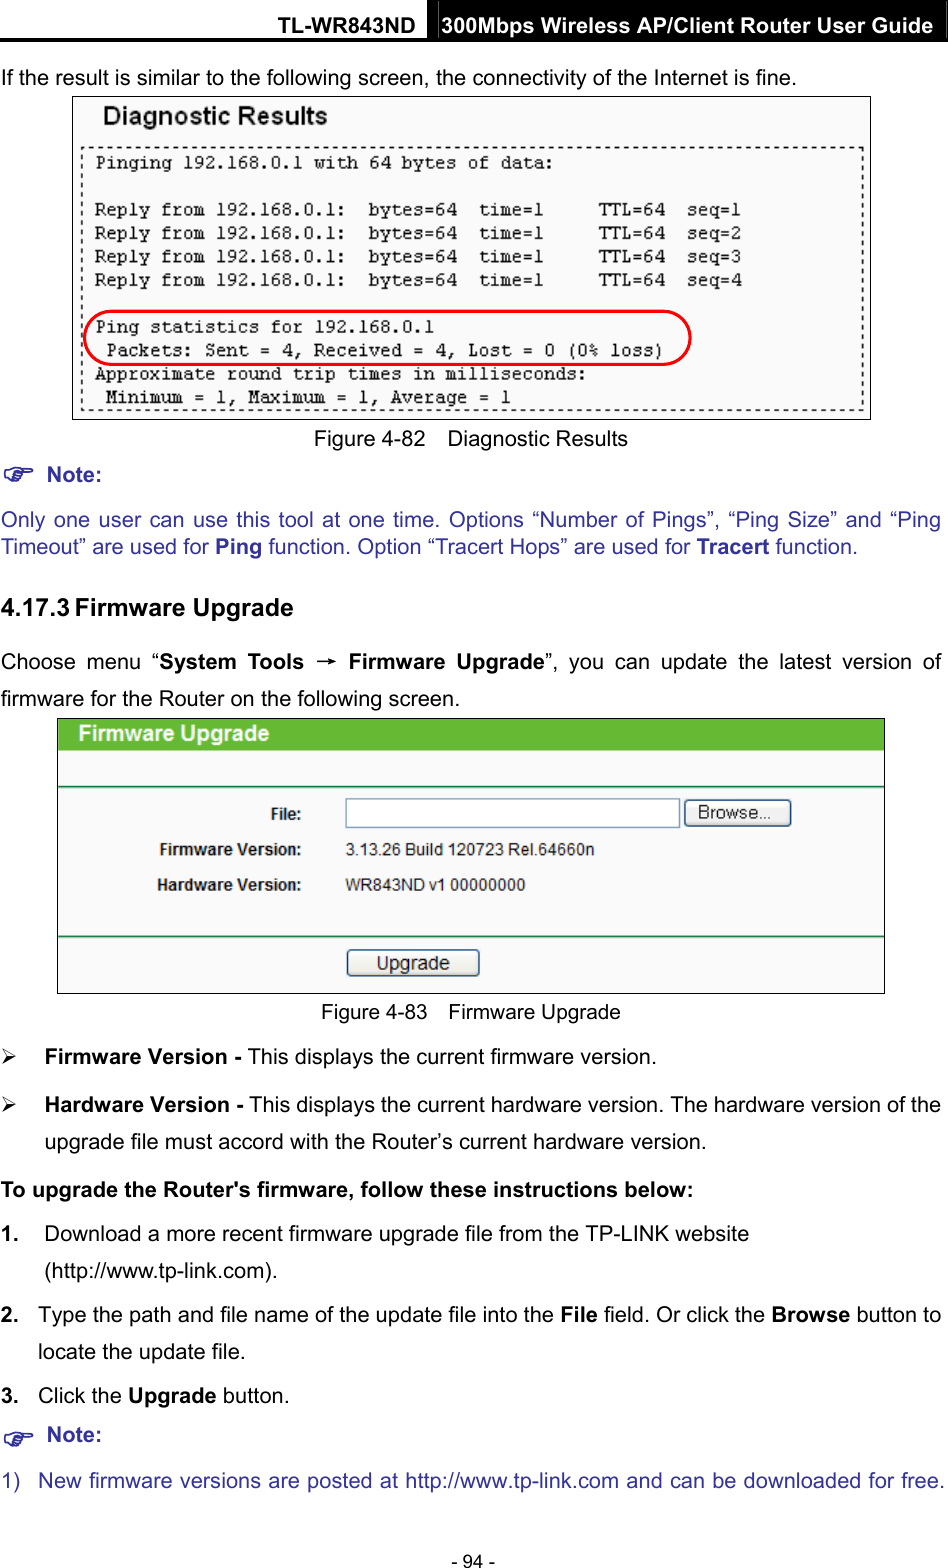 TL-WR843ND 300Mbps Wireless AP/Client Router User Guide - 94 - If the result is similar to the following screen, the connectivity of the Internet is fine.  Figure 4-82  Diagnostic Results  Note: Only one user can use this tool at one time. Options “Number of Pings”, “Ping Size” and “Ping Timeout” are used for Ping function. Option “Tracert Hops” are used for Tracert function. 4.17.3 Firmware Upgrade Choose menu “System Tools → Firmware Upgrade”, you can update the latest version of firmware for the Router on the following screen.  Figure 4-83  Firmware Upgrade  Firmware Version - This displays the current firmware version.  Hardware Version - This displays the current hardware version. The hardware version of the upgrade file must accord with the Router’s current hardware version. To upgrade the Router&apos;s firmware, follow these instructions below: 1.  Download a more recent firmware upgrade file from the TP-LINK website (http://www.tp-link.com).  2.  Type the path and file name of the update file into the File field. Or click the Browse button to locate the update file. 3.  Click the Upgrade button.  Note: 1)  New firmware versions are posted at http://www.tp-link.com and can be downloaded for free. 